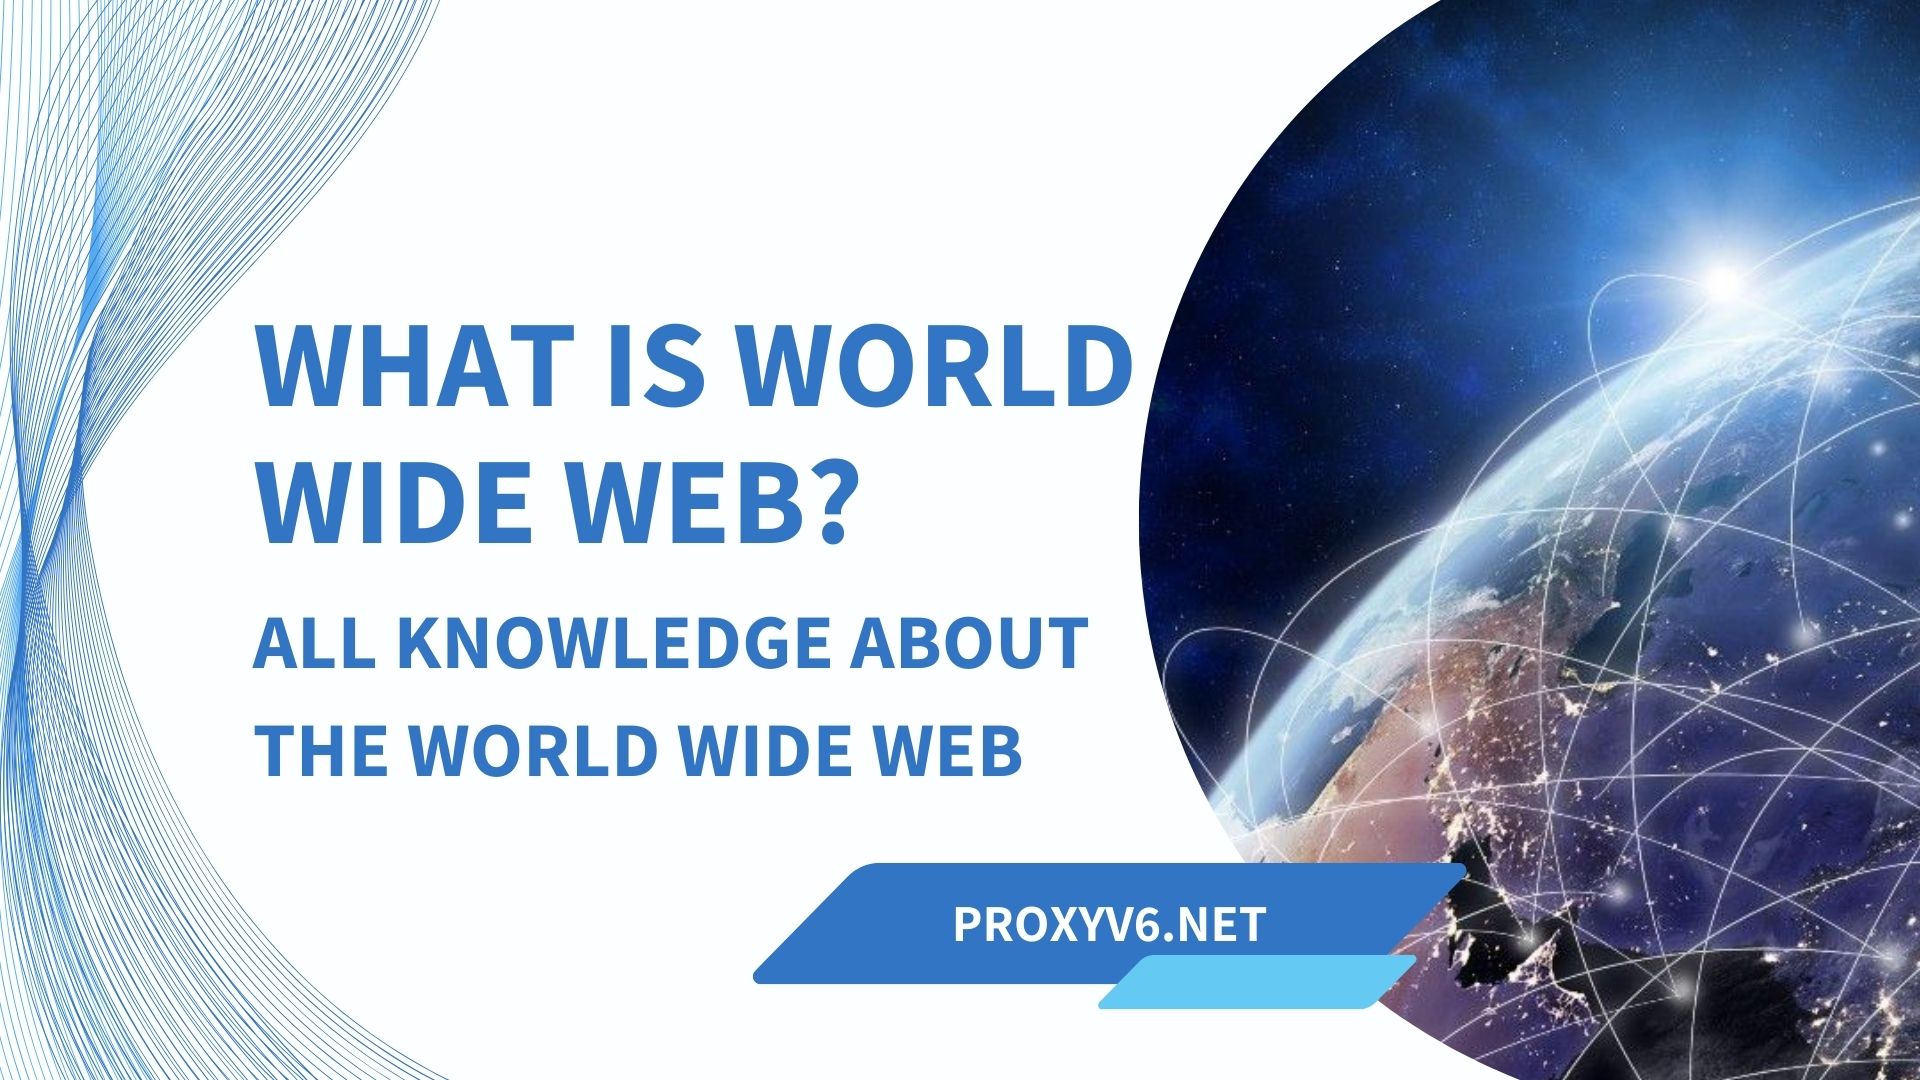 What is World Wide Web? All knowledge about the World Wide Web